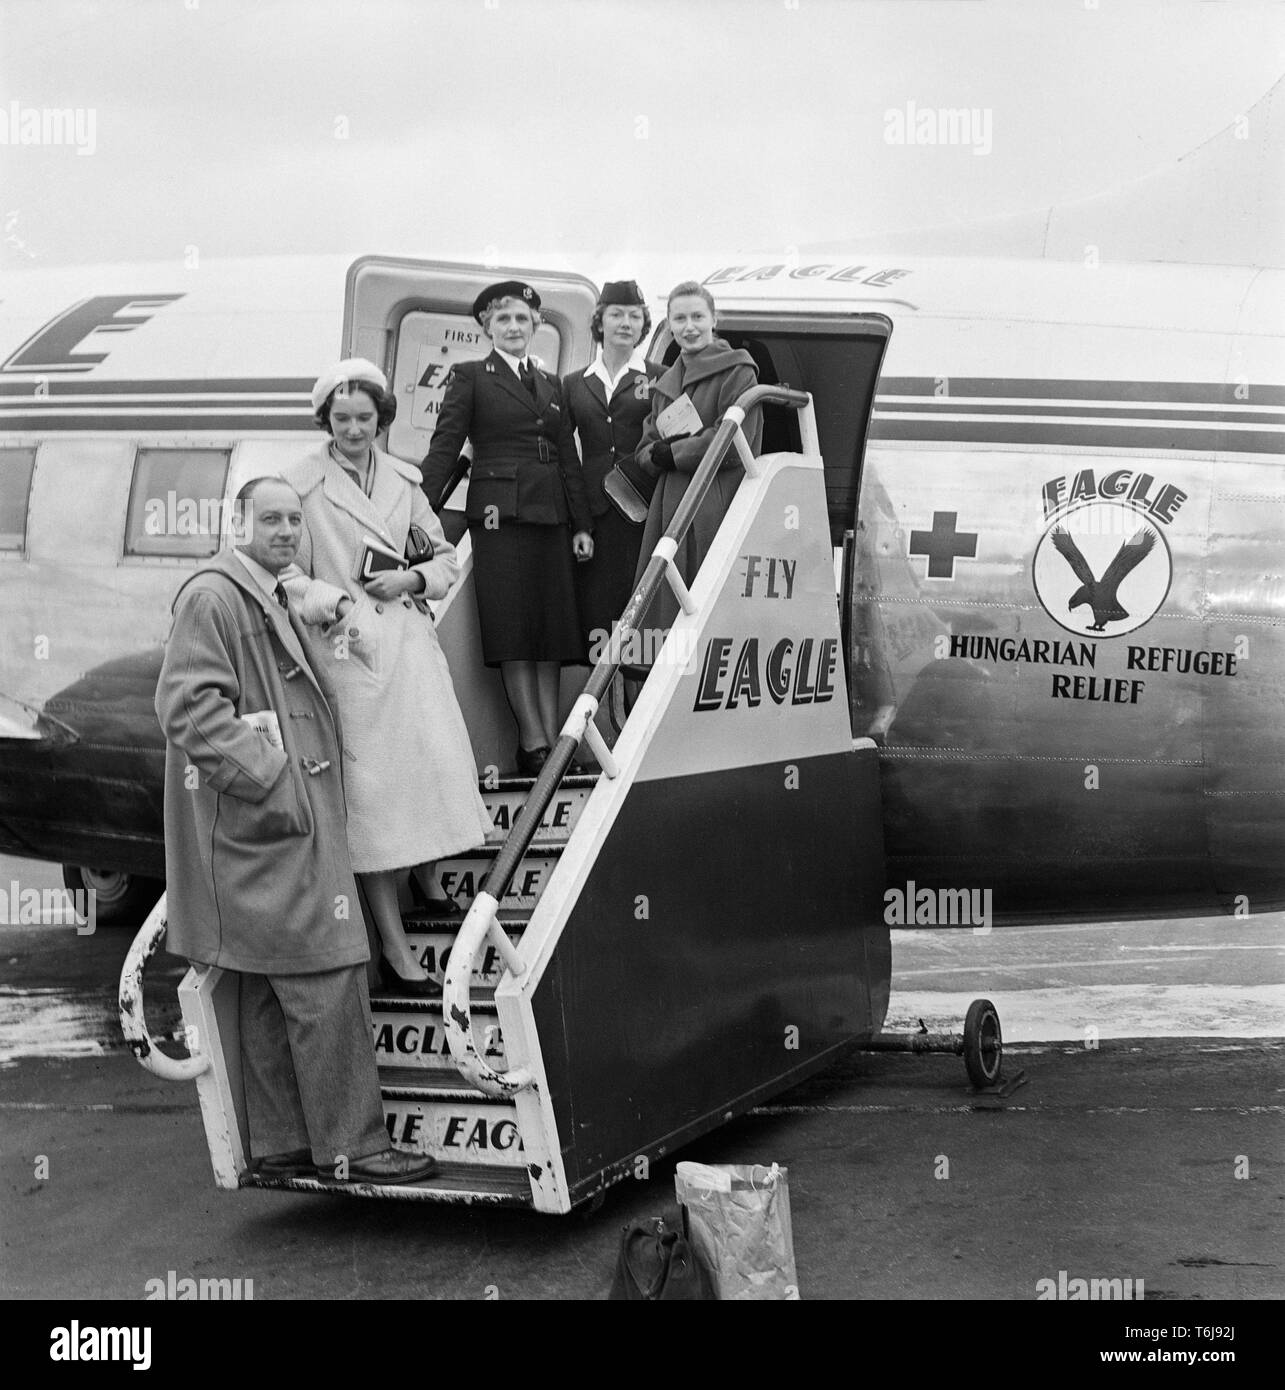 A Vickers Viking aeroplane belonging to the British airline Eagle Airways, bringing refugees from  Hungary to Britain. Photograph taken at Blackbushe Aerodrome in England in 1957. Stewardesses and other staff posing on the steps up to the aeroplane which has Hungarian Refugee Relief written on the side. Stock Photo